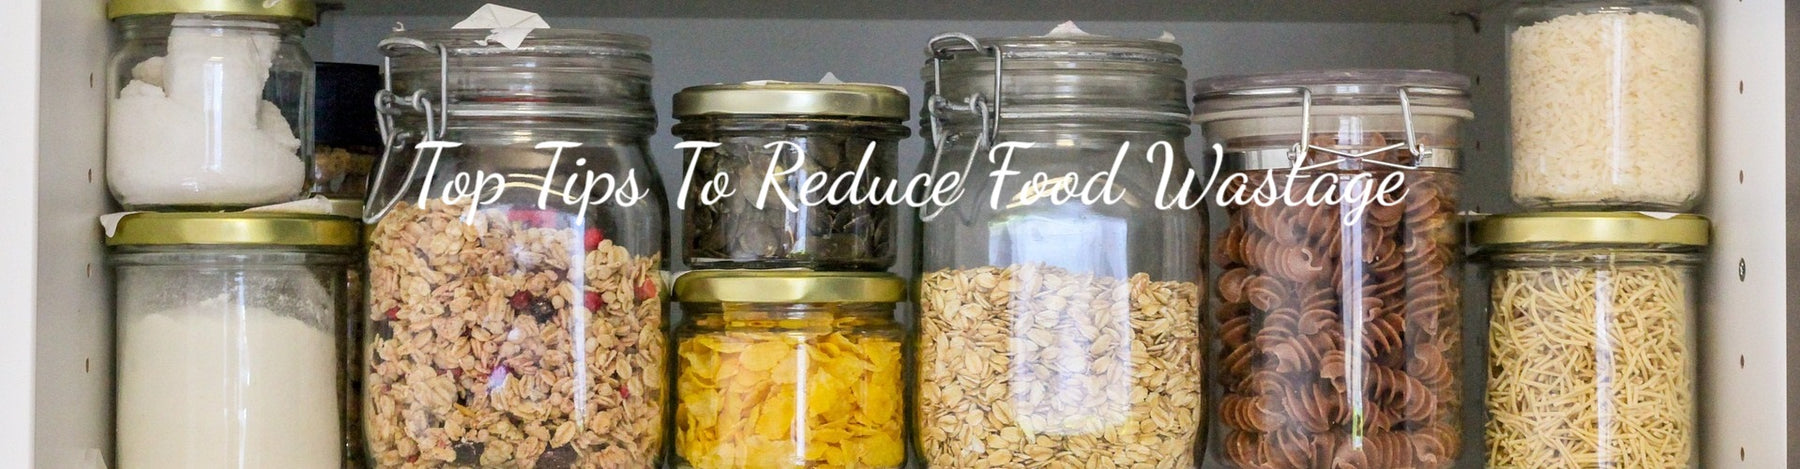 Top Tips To Reduce Food Wastage